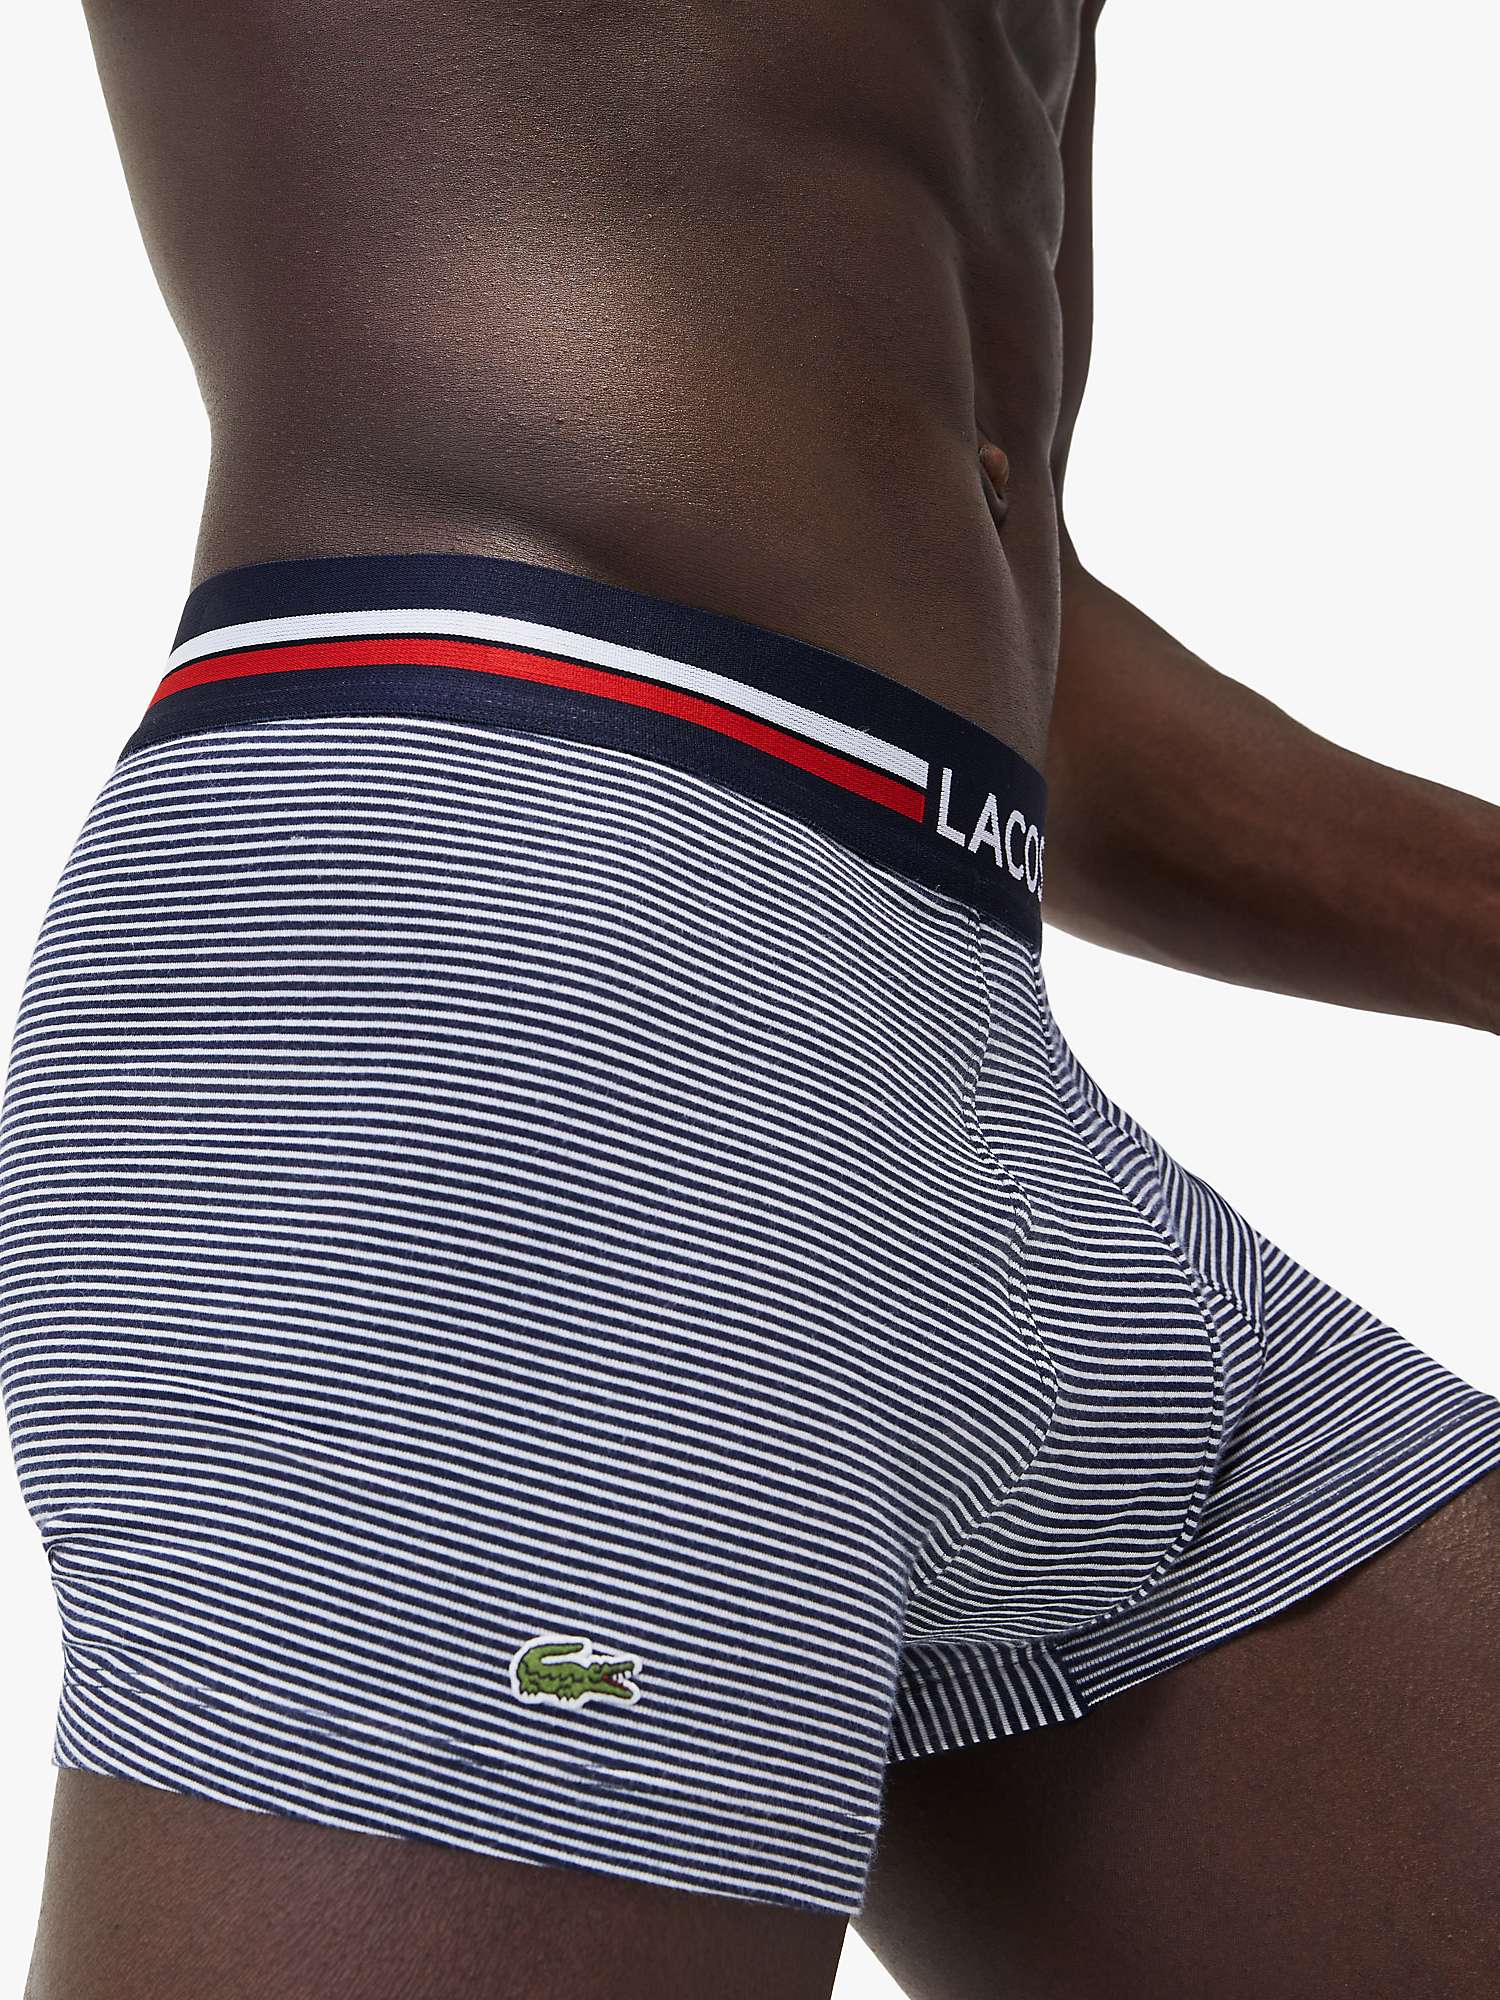 Buy Lacoste Three Tone Colour Waistband Trunks, Pack of 3, Marine/White Online at johnlewis.com